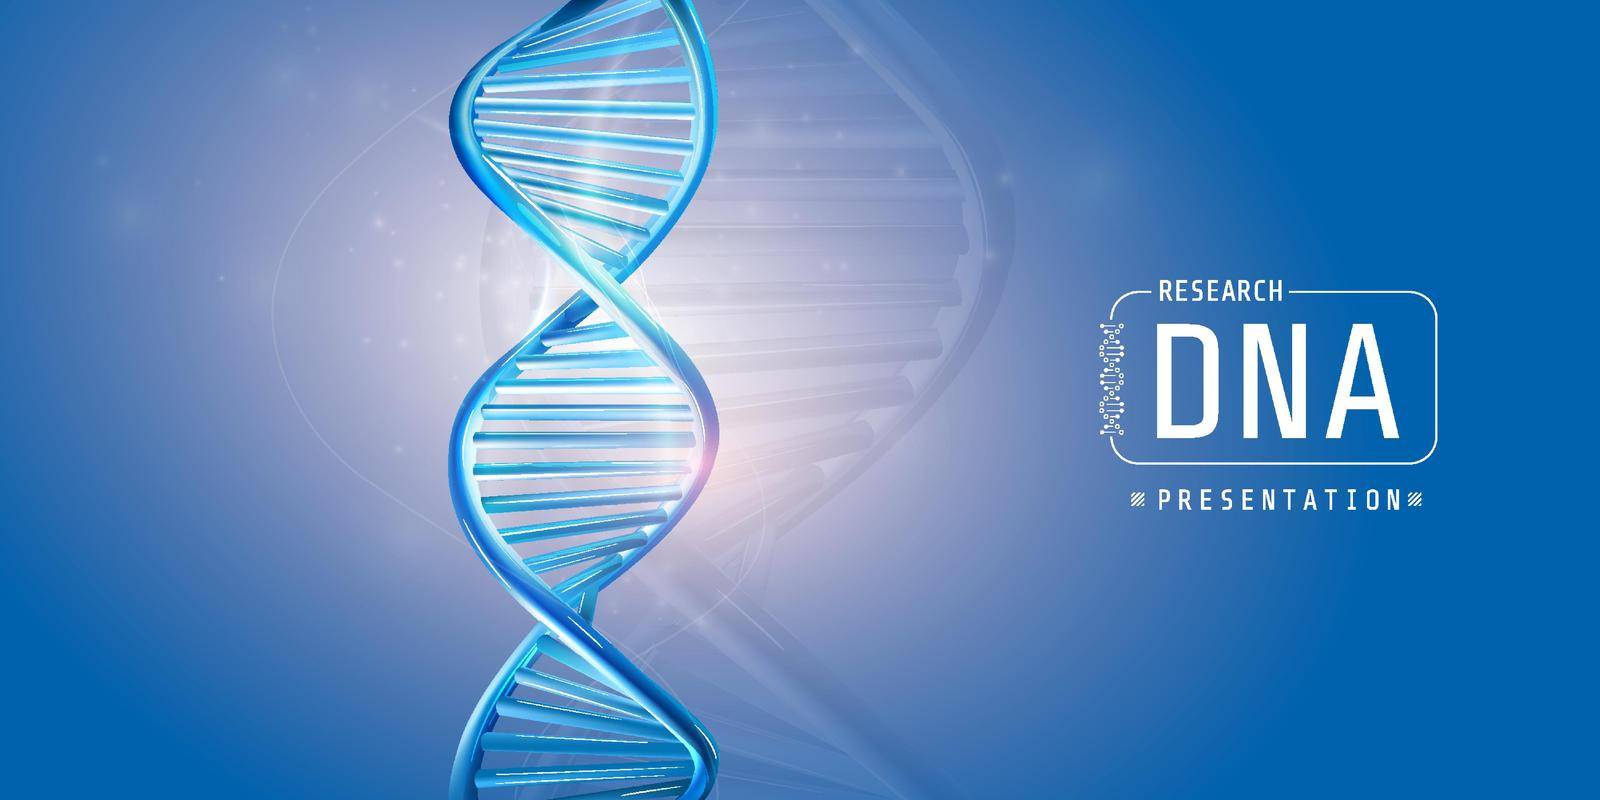 Vertical model of DNA with abstract presentation title on a blue background. Vector illustration.